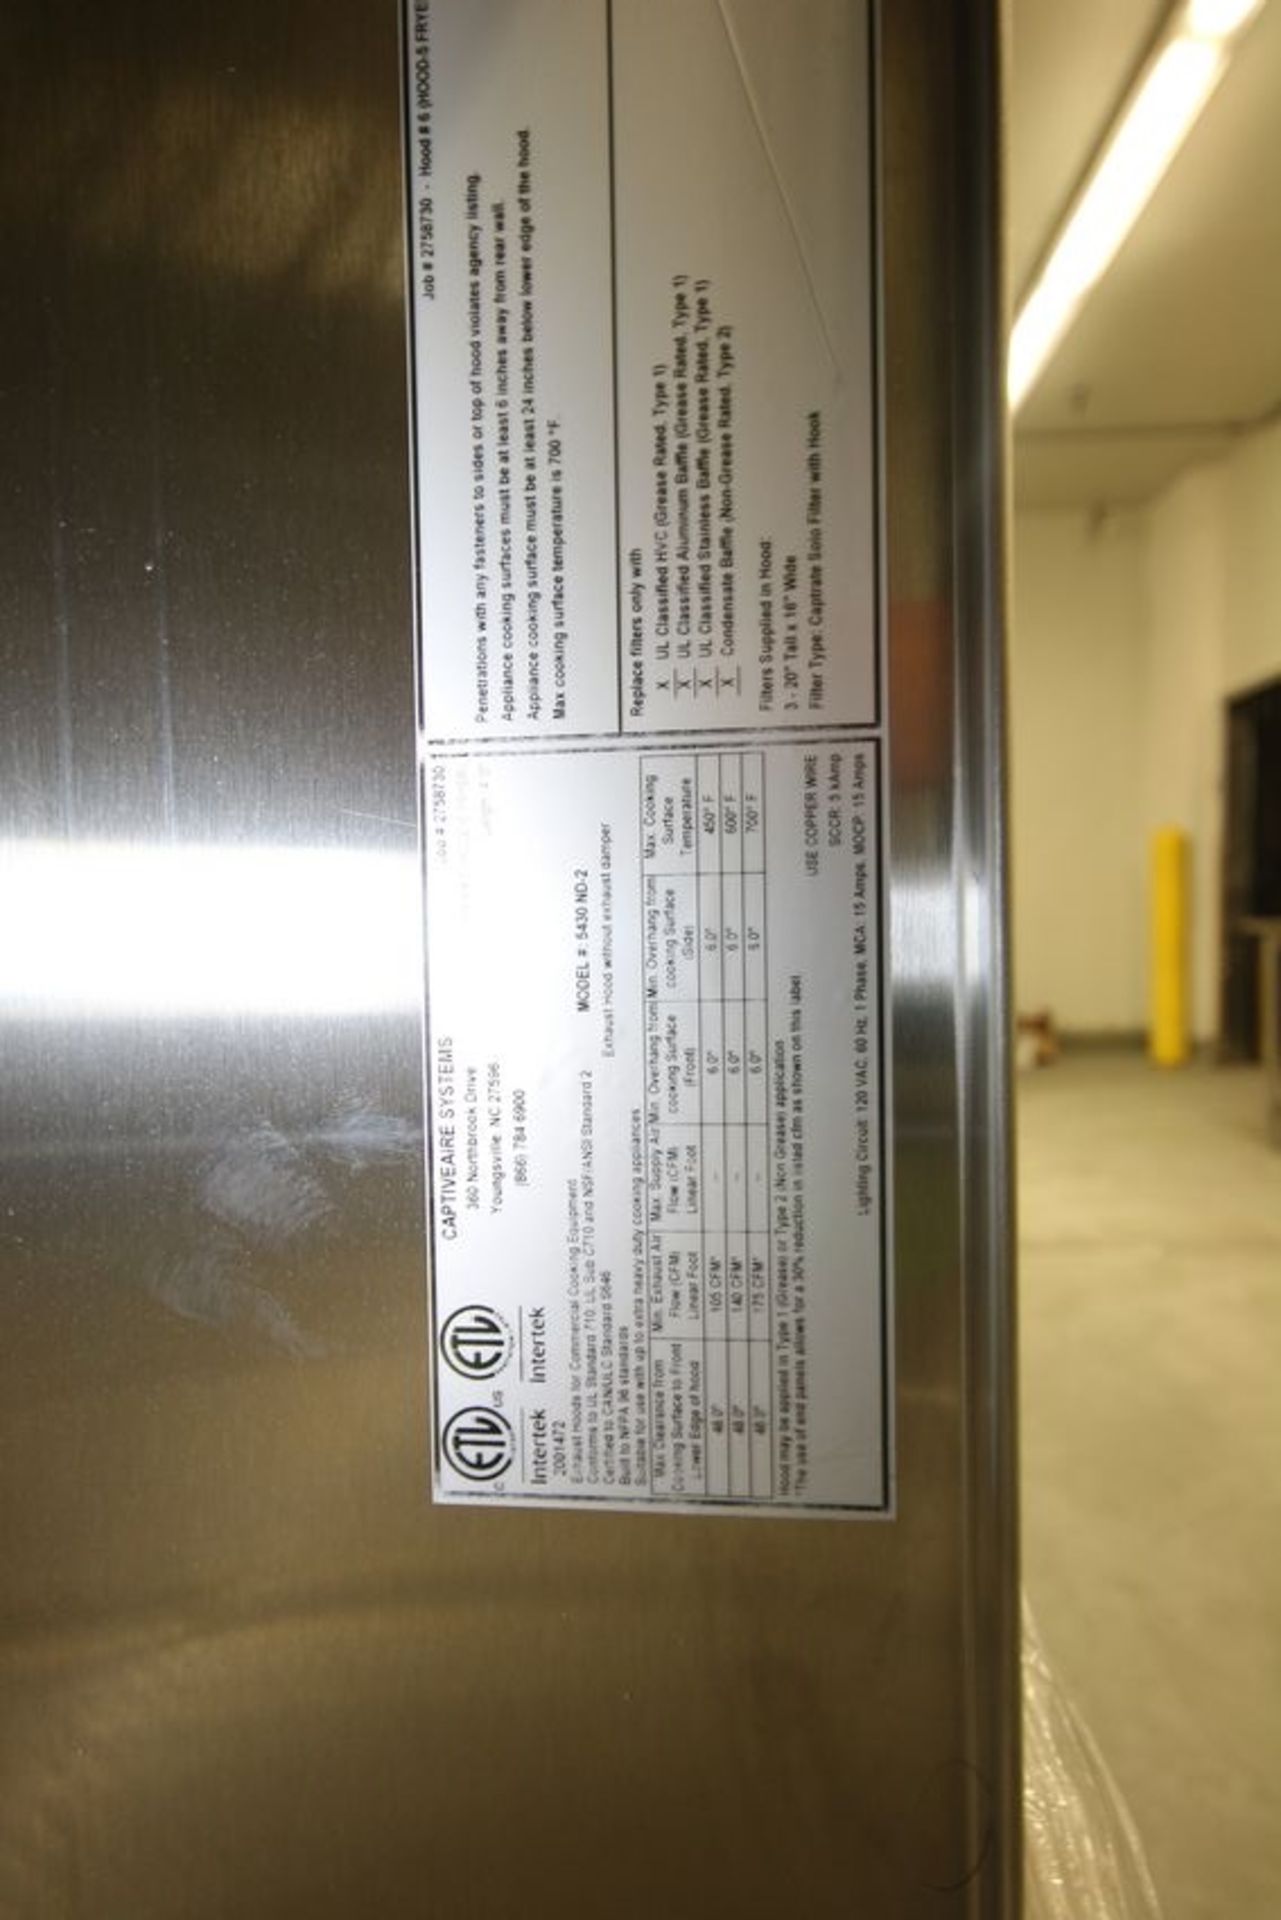 Captiveaire Systems All S/S Exhaust Hood, Model 5430ND-2, Job #2758730 with 4-Valve Fire Suppression - Image 3 of 4